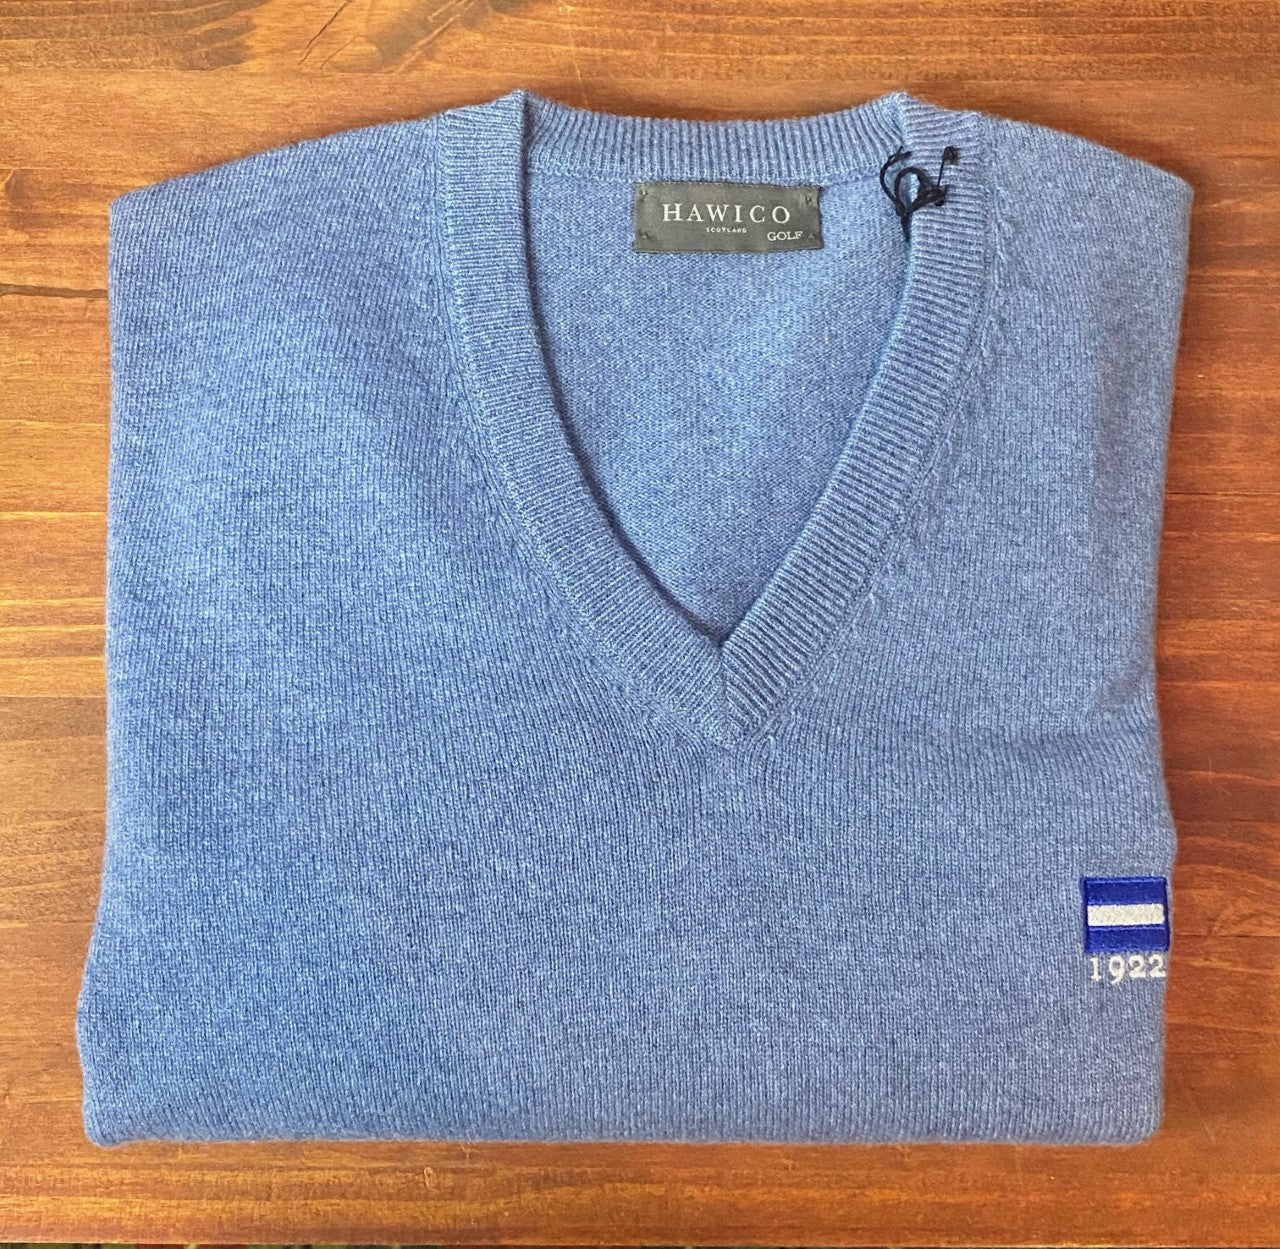 Hawico Cashmere Sweater – Biltmore Forest Country Club